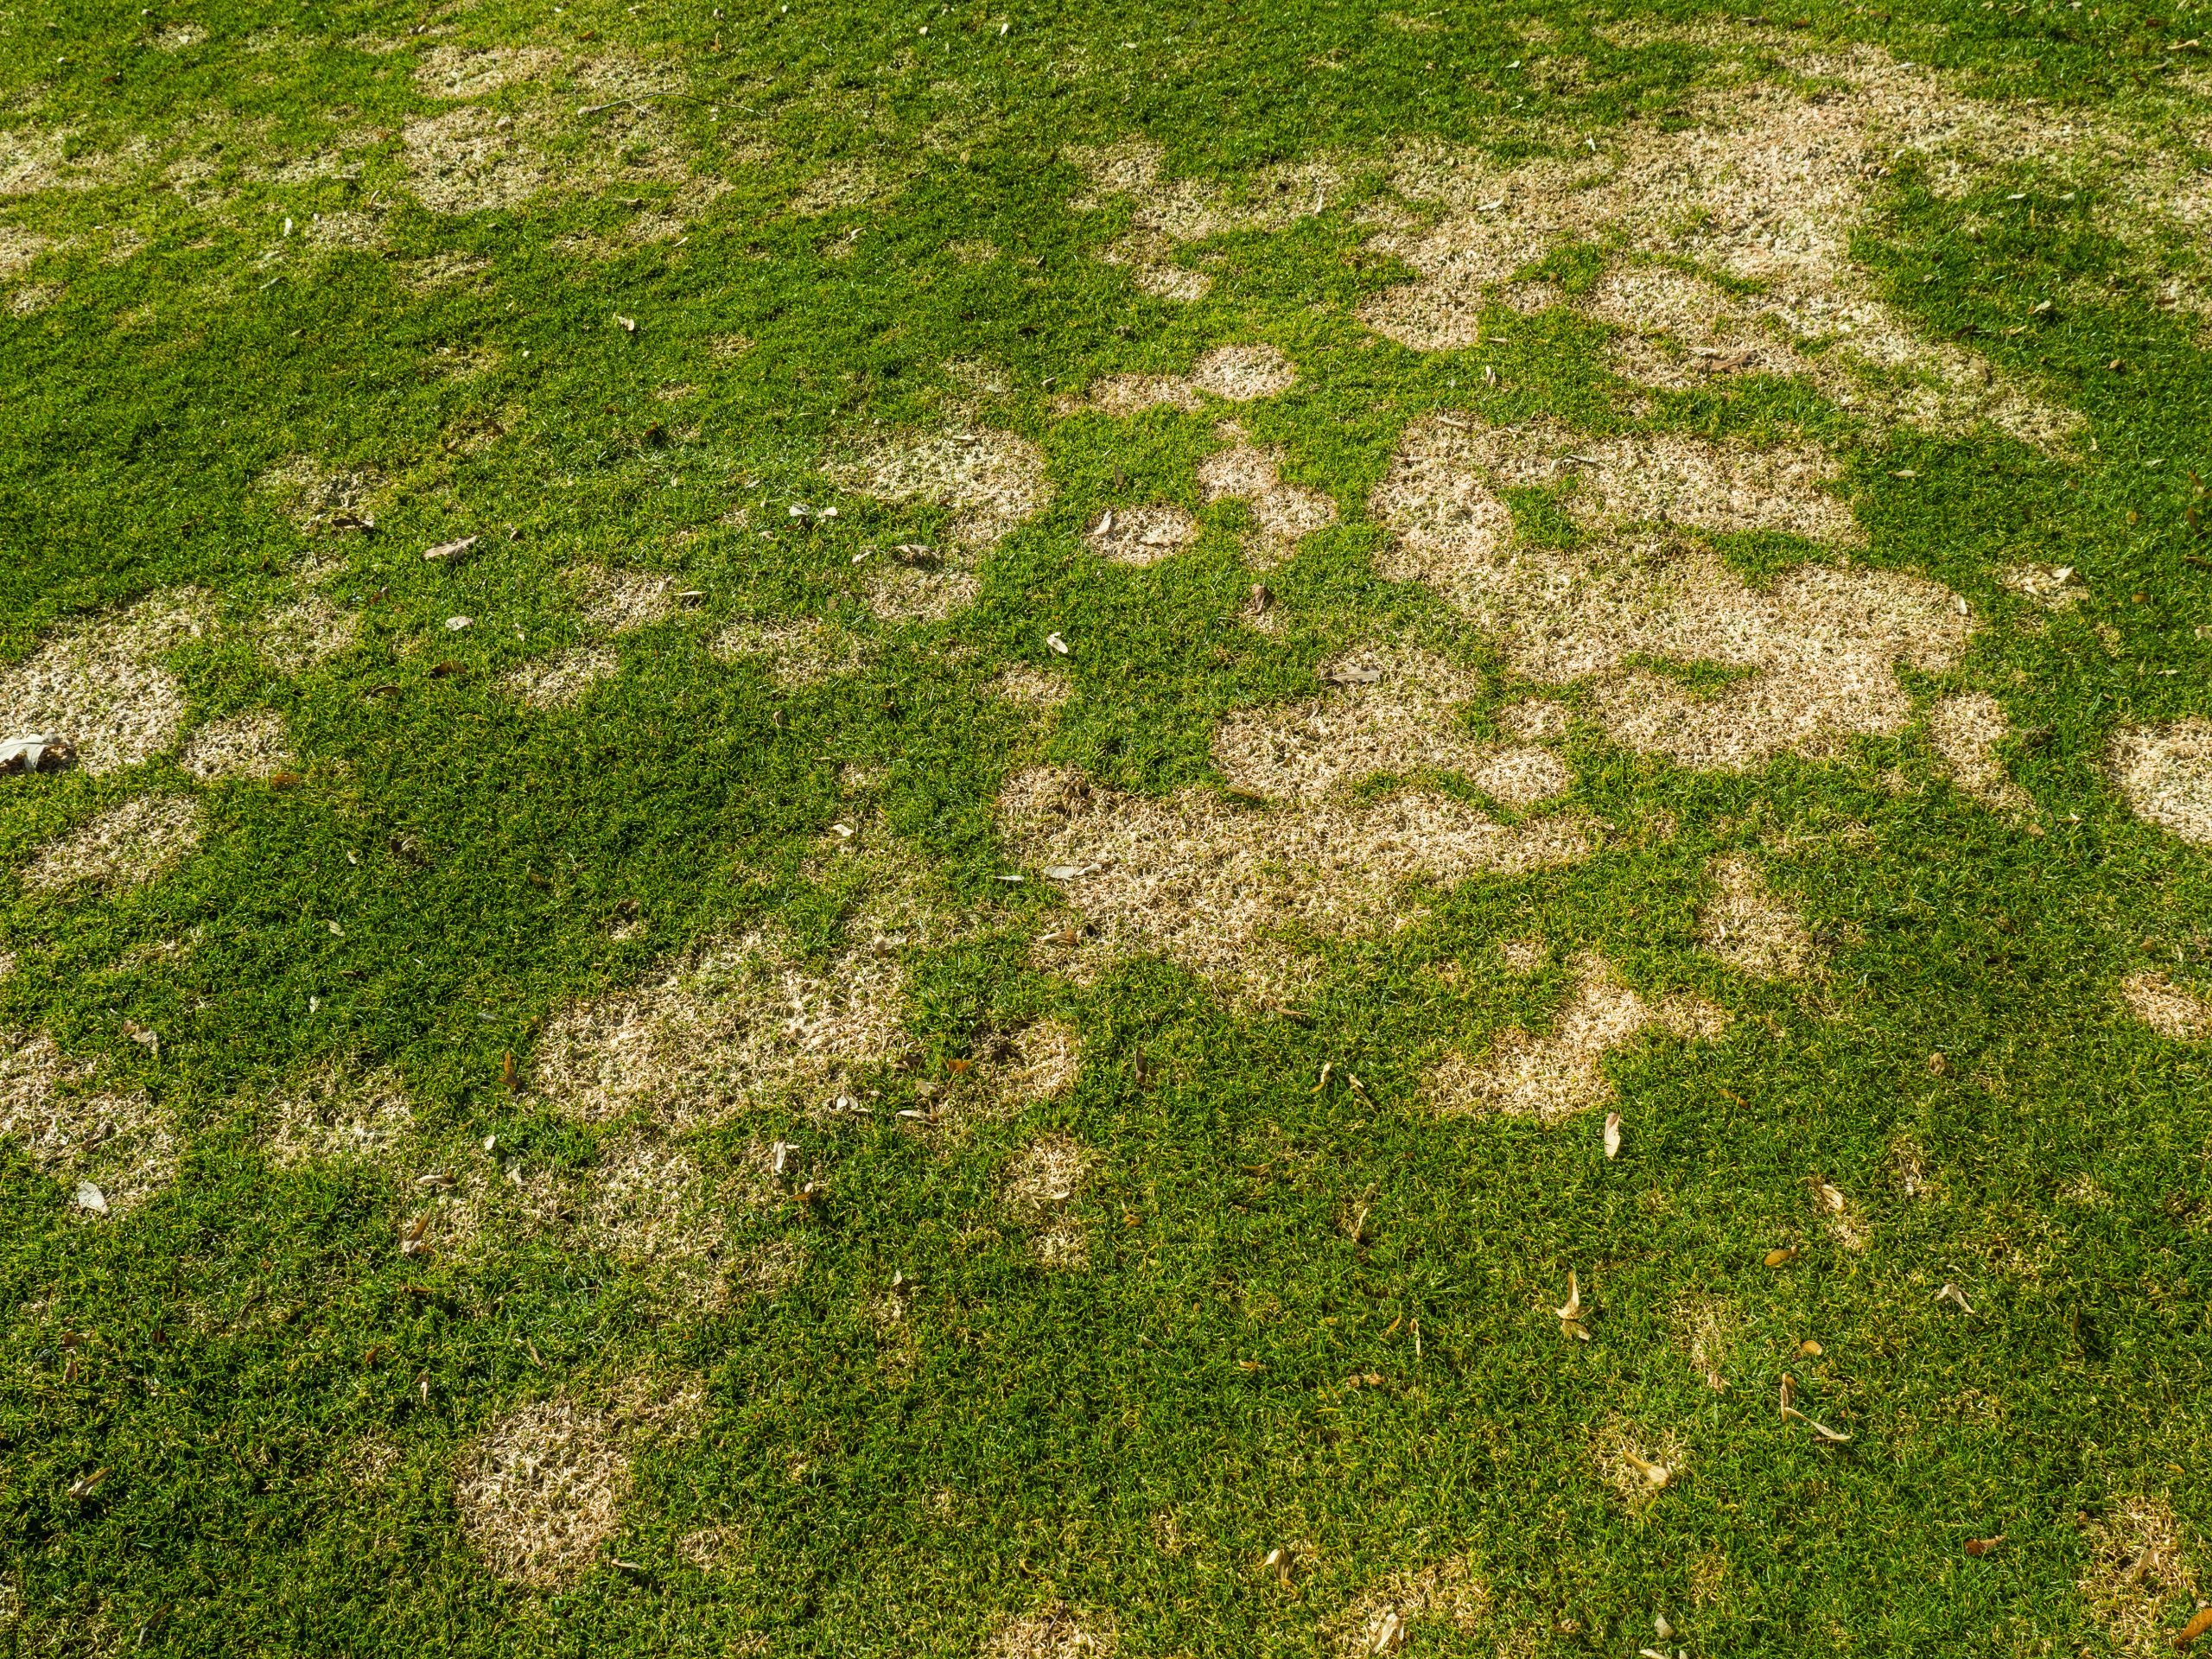 turfgrass with disease